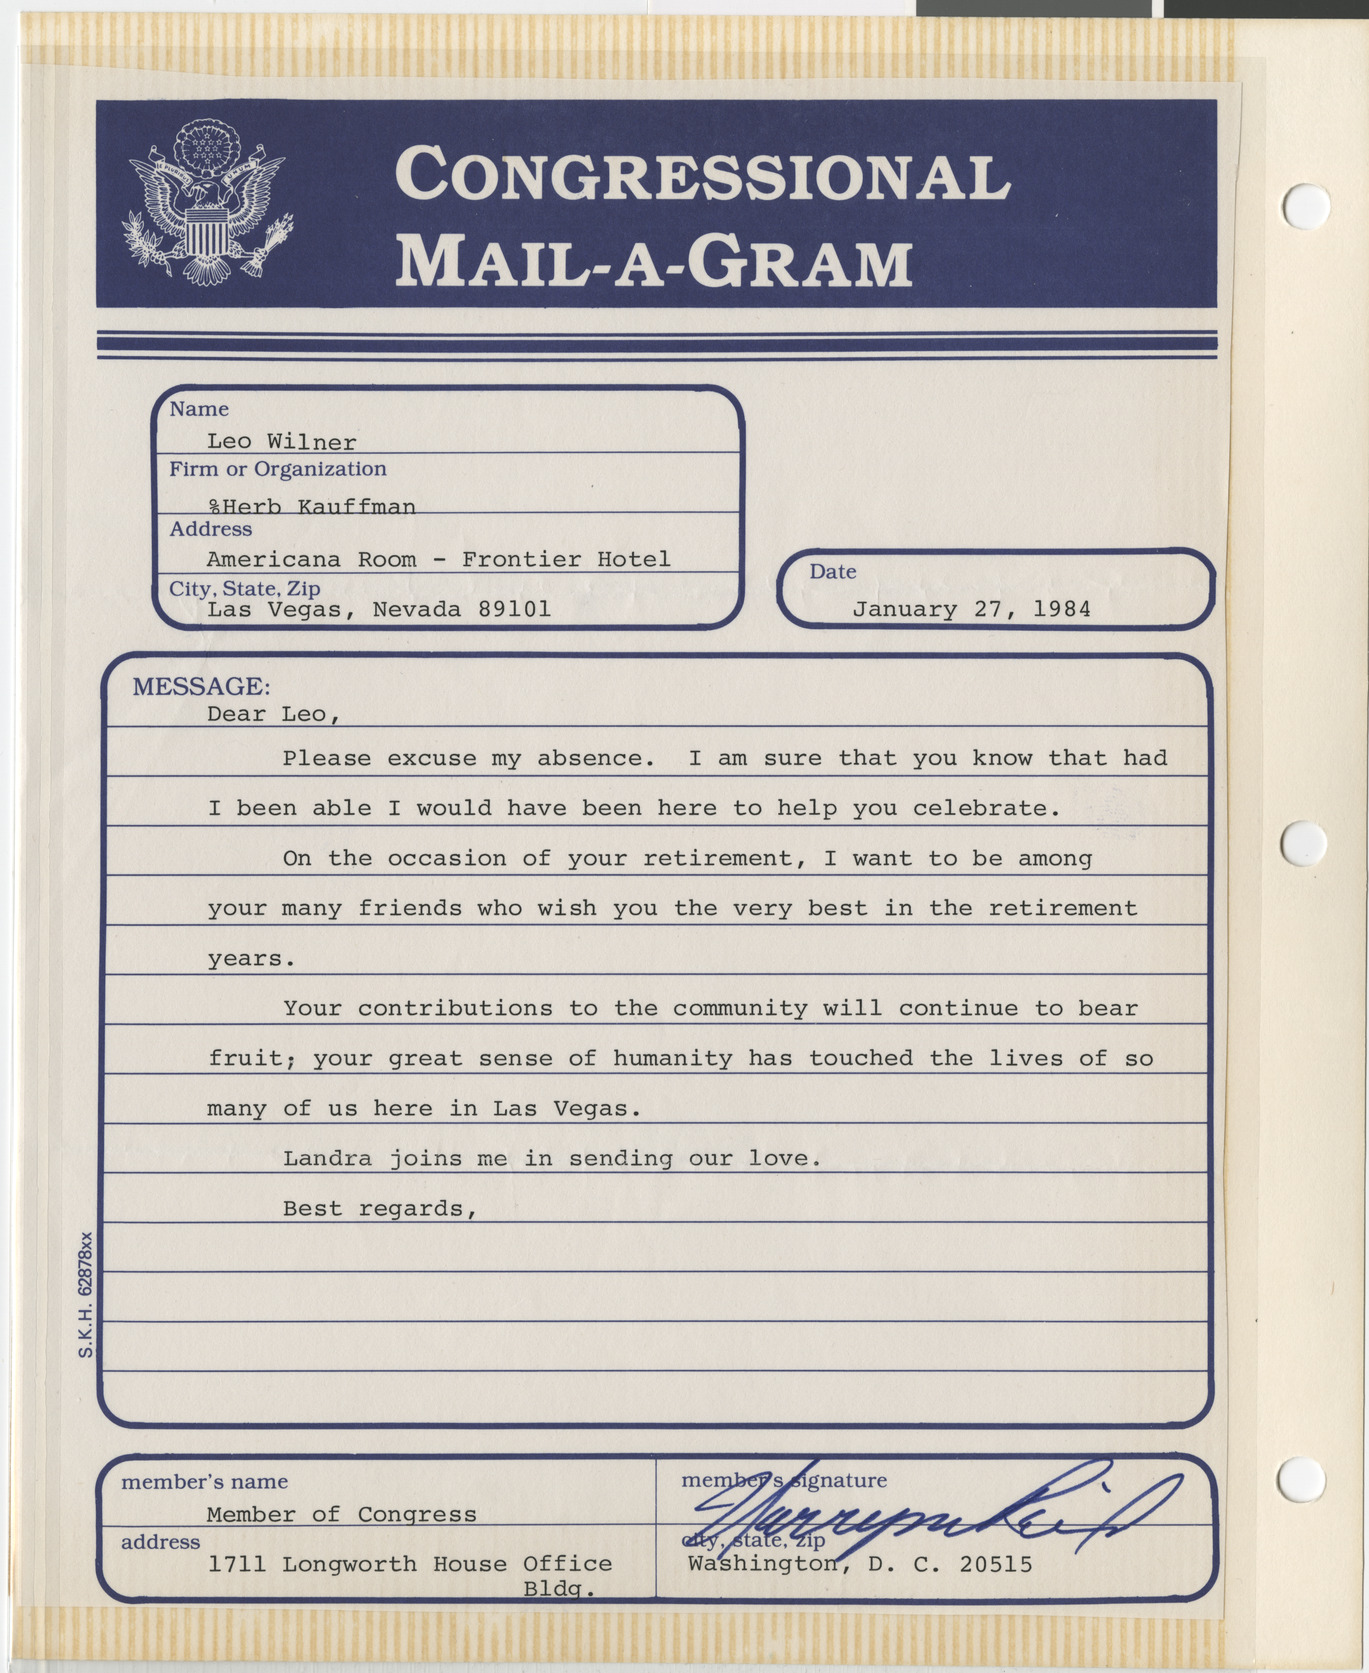 Congressional Mail-a-Gram from Harry Reid to Leo Wilner, January 27, 1984